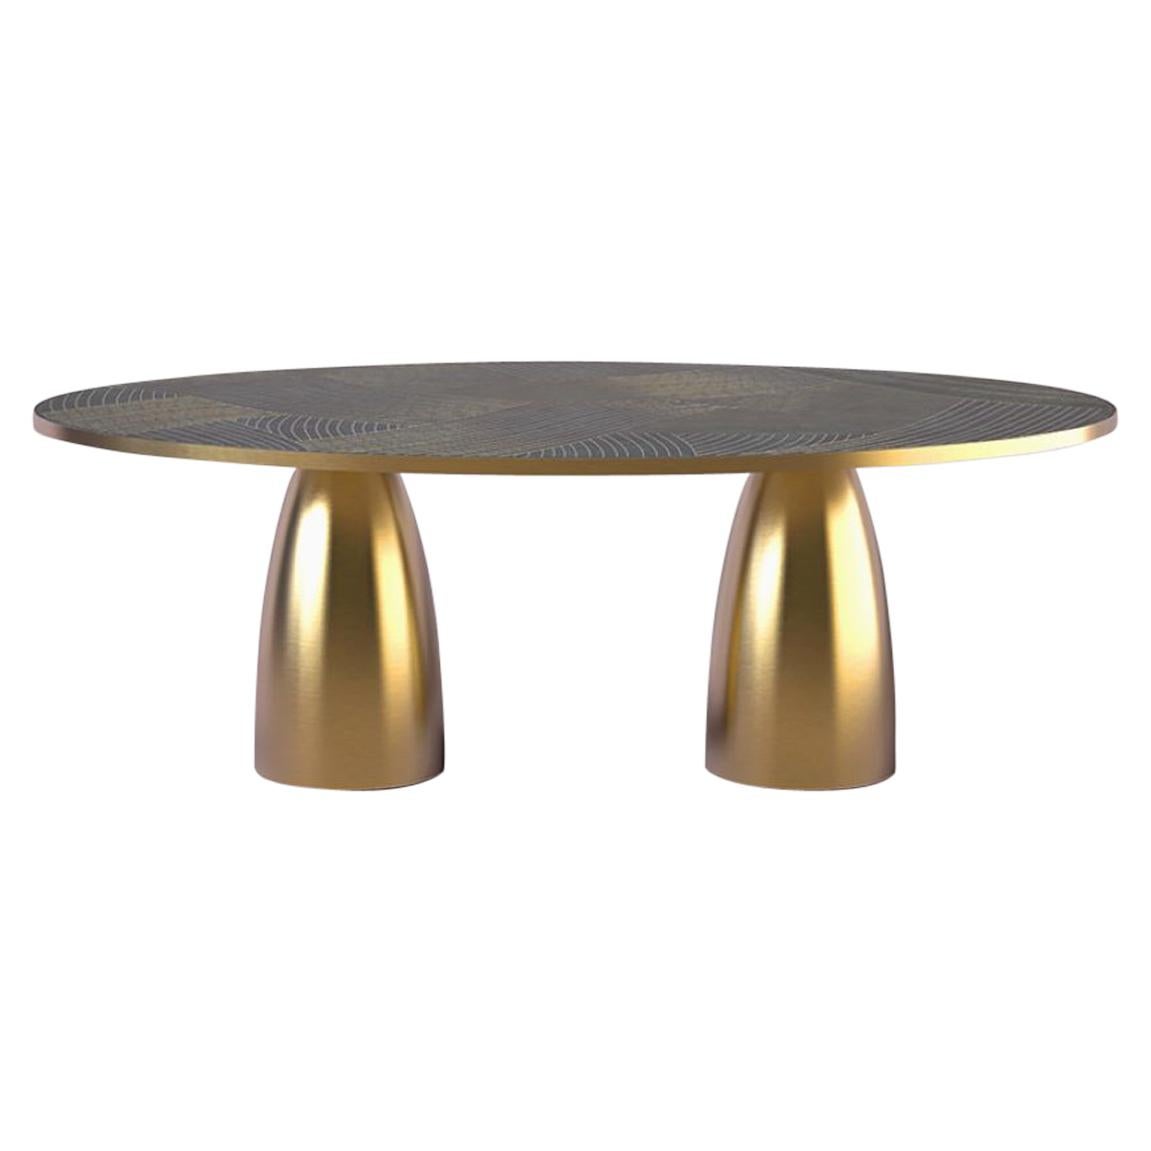 Bethan Gray Lustre Dhow Oval Dining Table Double Pedestal in Black and Brass